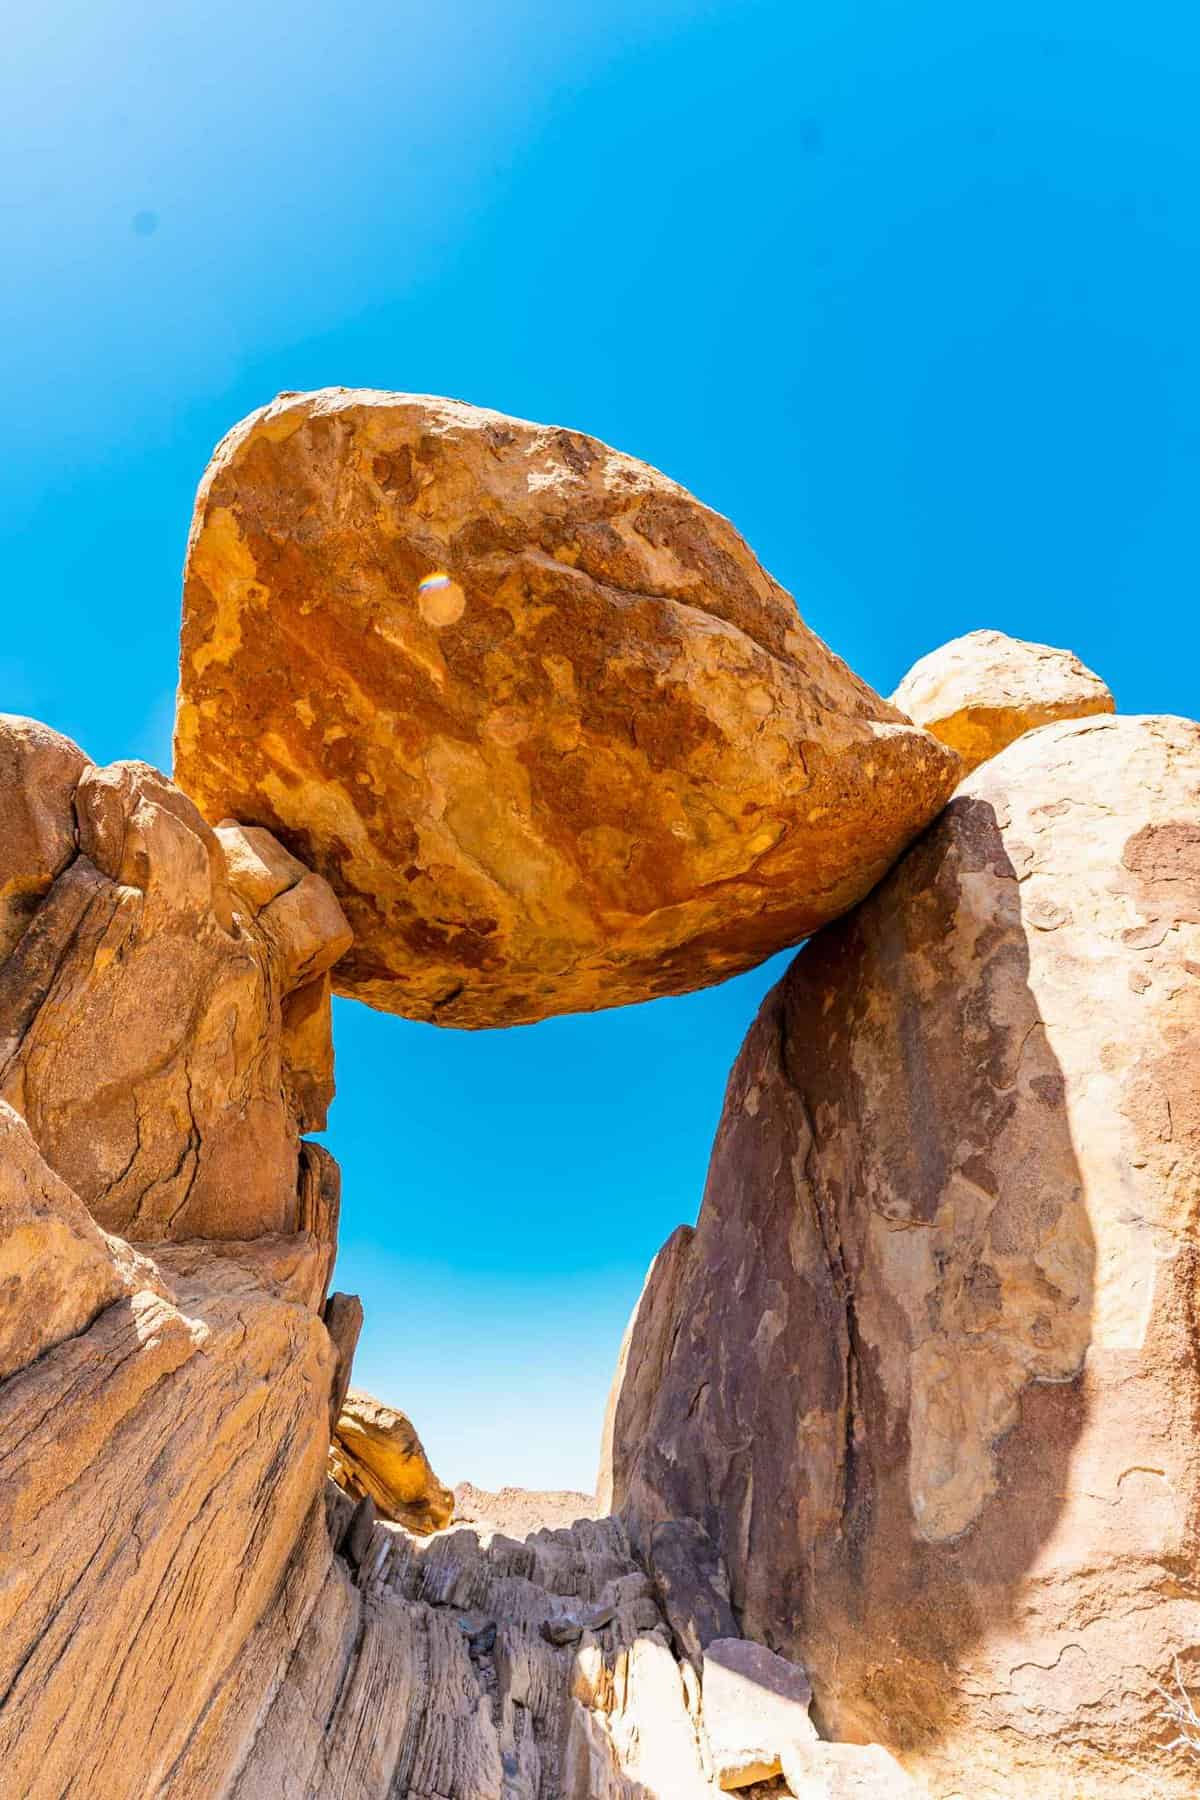 The Balanced Rock formation in Big Bend